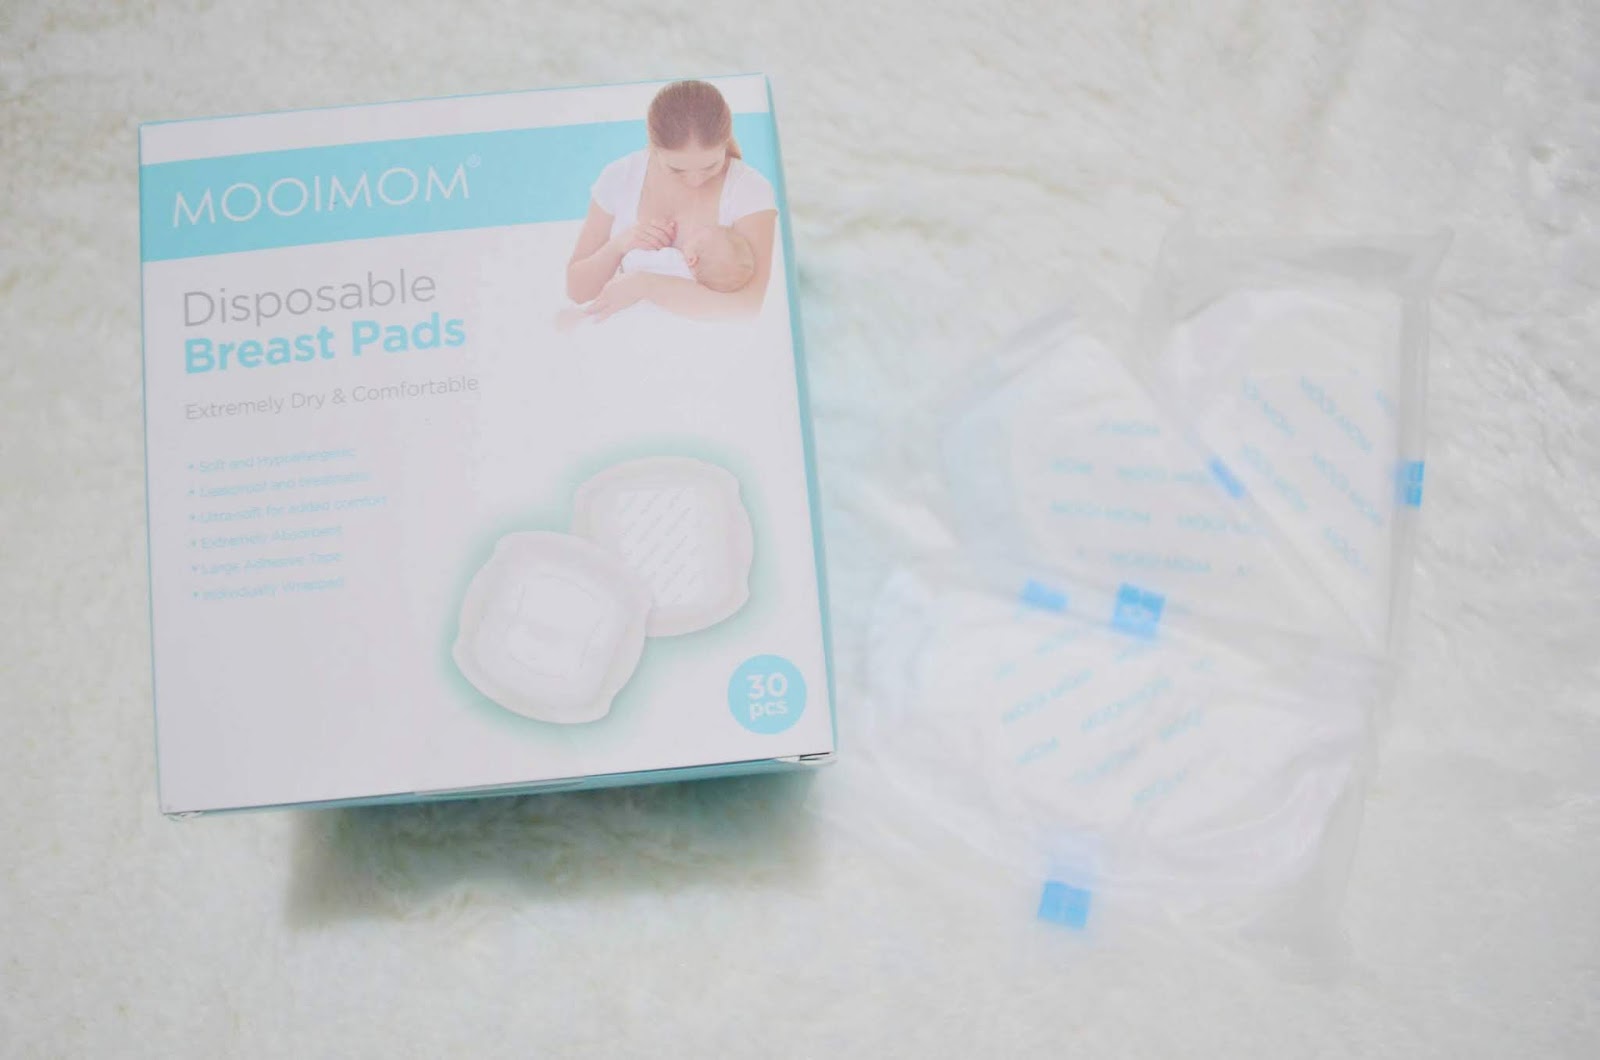 review pompa asi mooimom, review pompa asi silicone mooimom, review pompa asi elektrik mooimom, review pompa asi yang bagus, review pompa asi yang murah, review pompa asi yang nyaman, review pompa asi yang paling baik, review pompa asi yang murah dan bagus, review pompa asi elektrik yang bagus, review pompa asi elektrik yang tidak bikin sakit, review pompa asi medela harmony, review pompa asi medela mini electric, review pompa asi spectra 9s, review pompa asi elektrik, review pompa asi manual